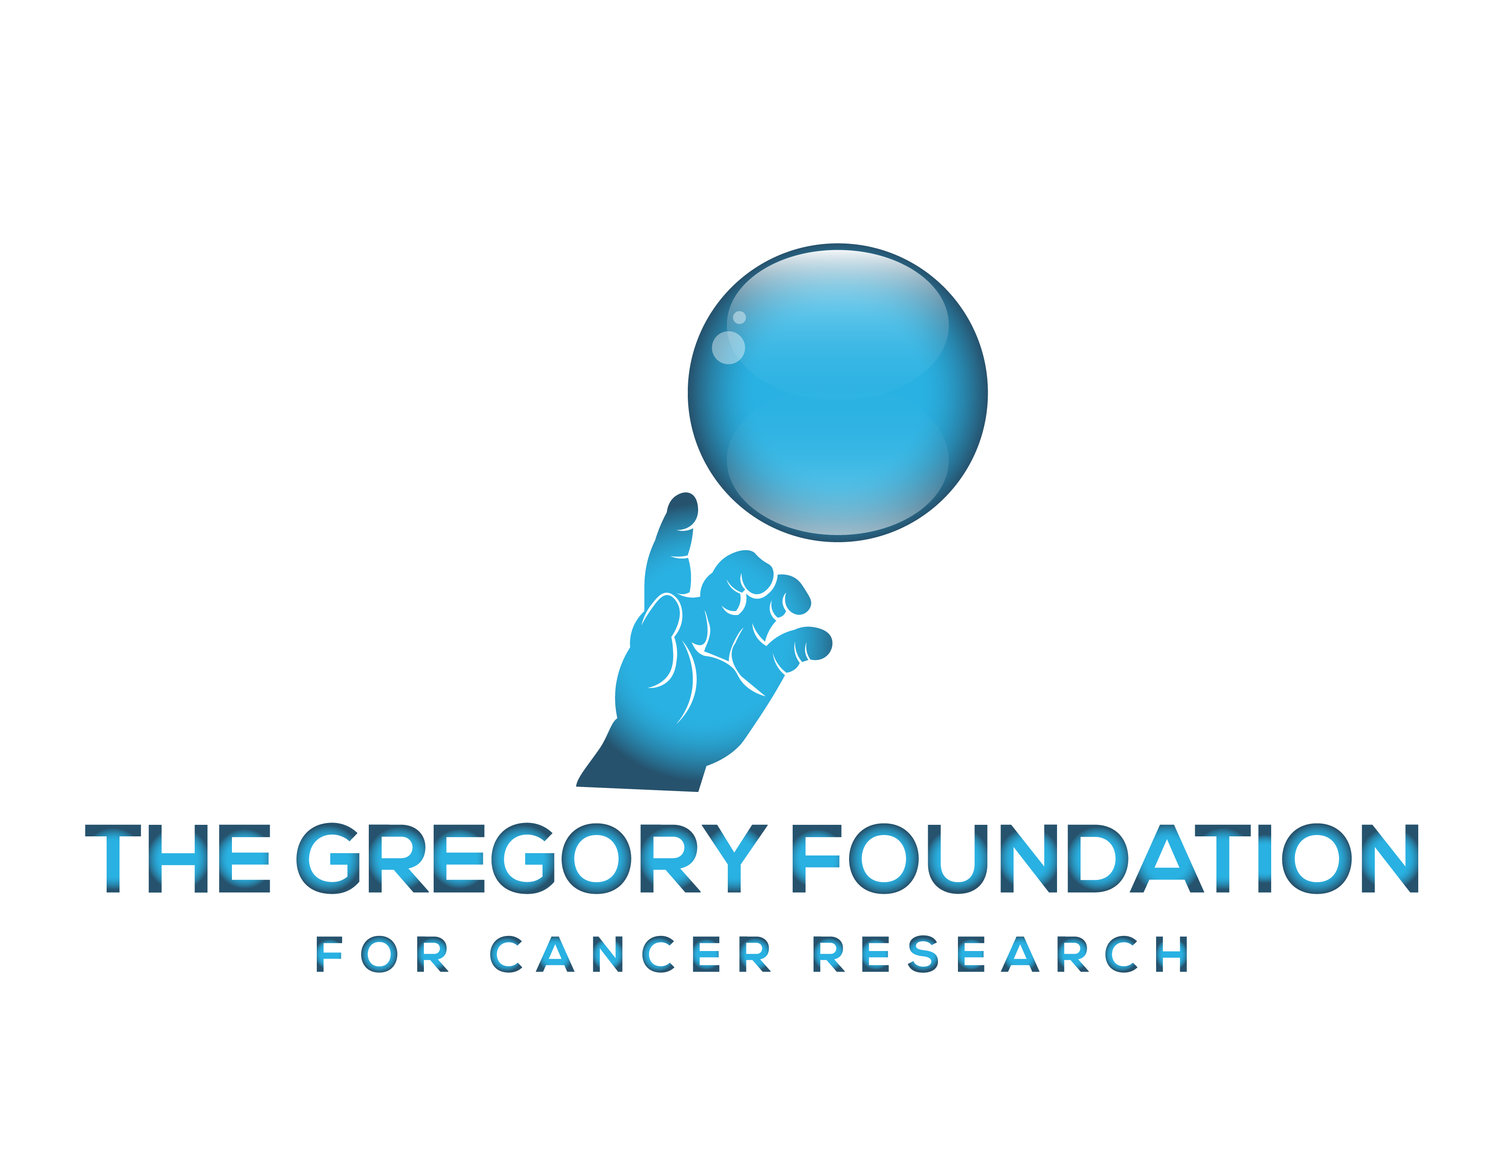 The Gregory Foundation for Cancer Research